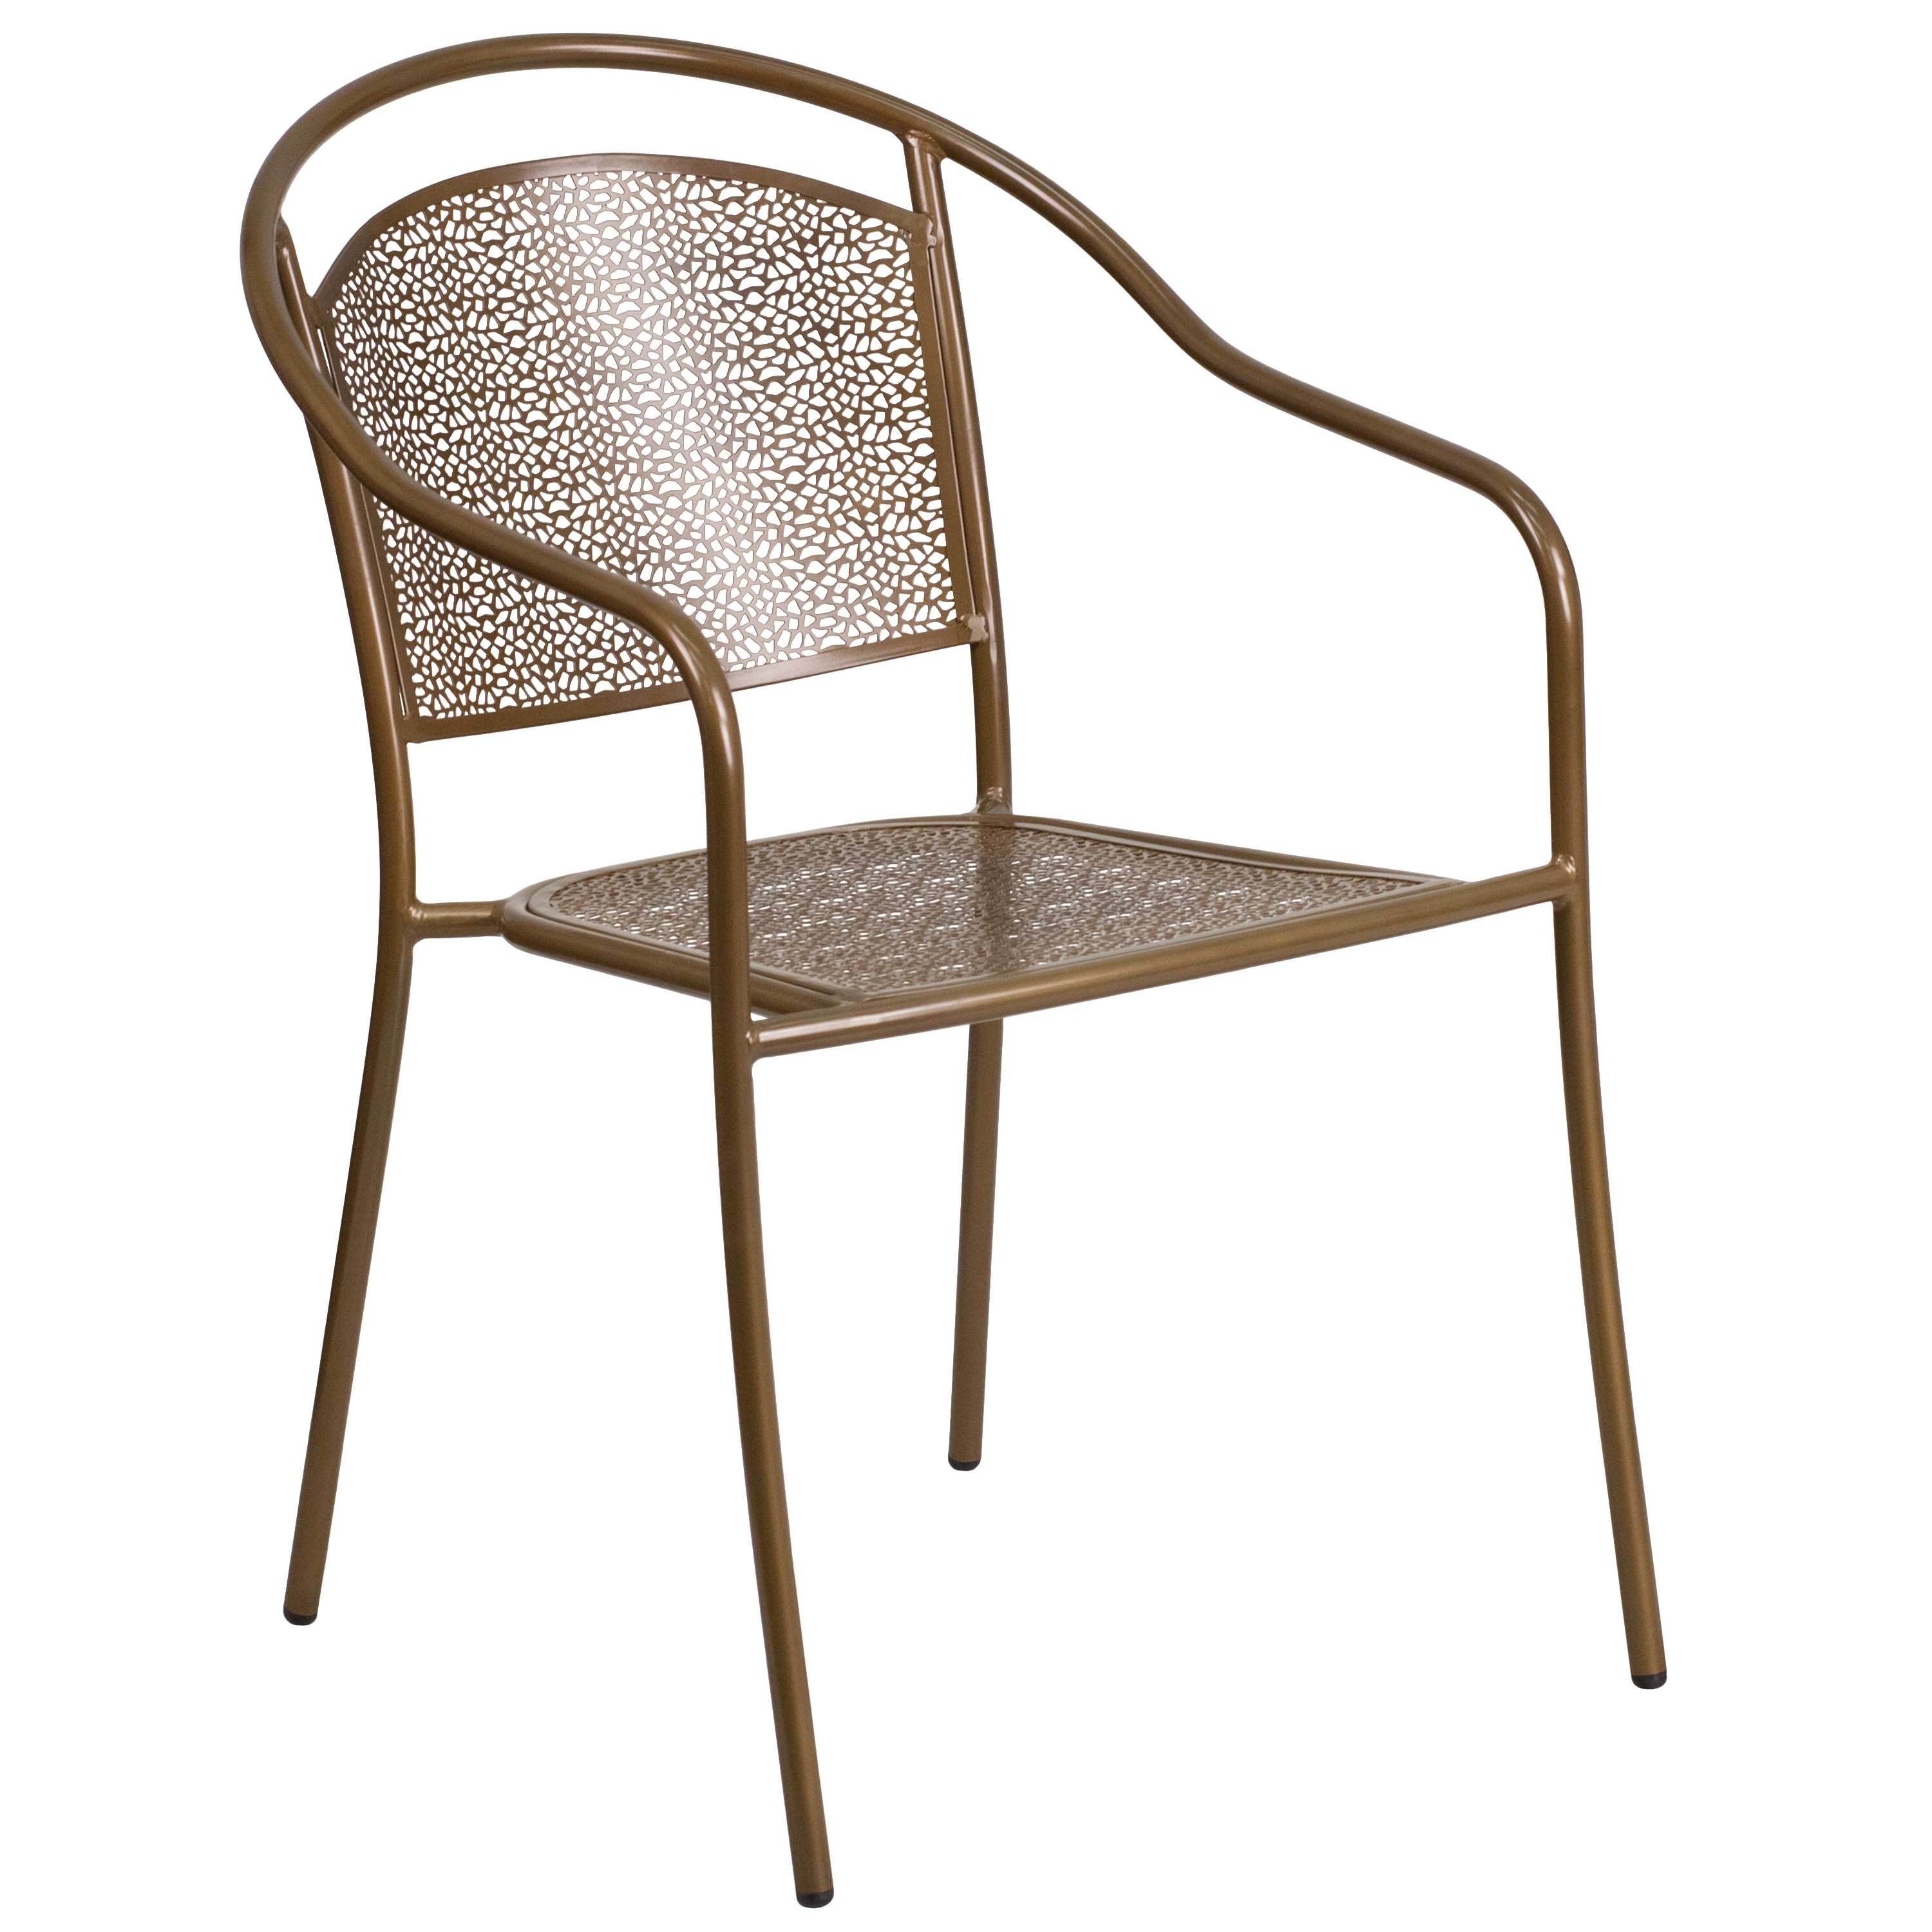 Flash Furniture CO-3-GD-GG Gold Indoor/Outdoor Steel Patio Arm Chair with Round Back